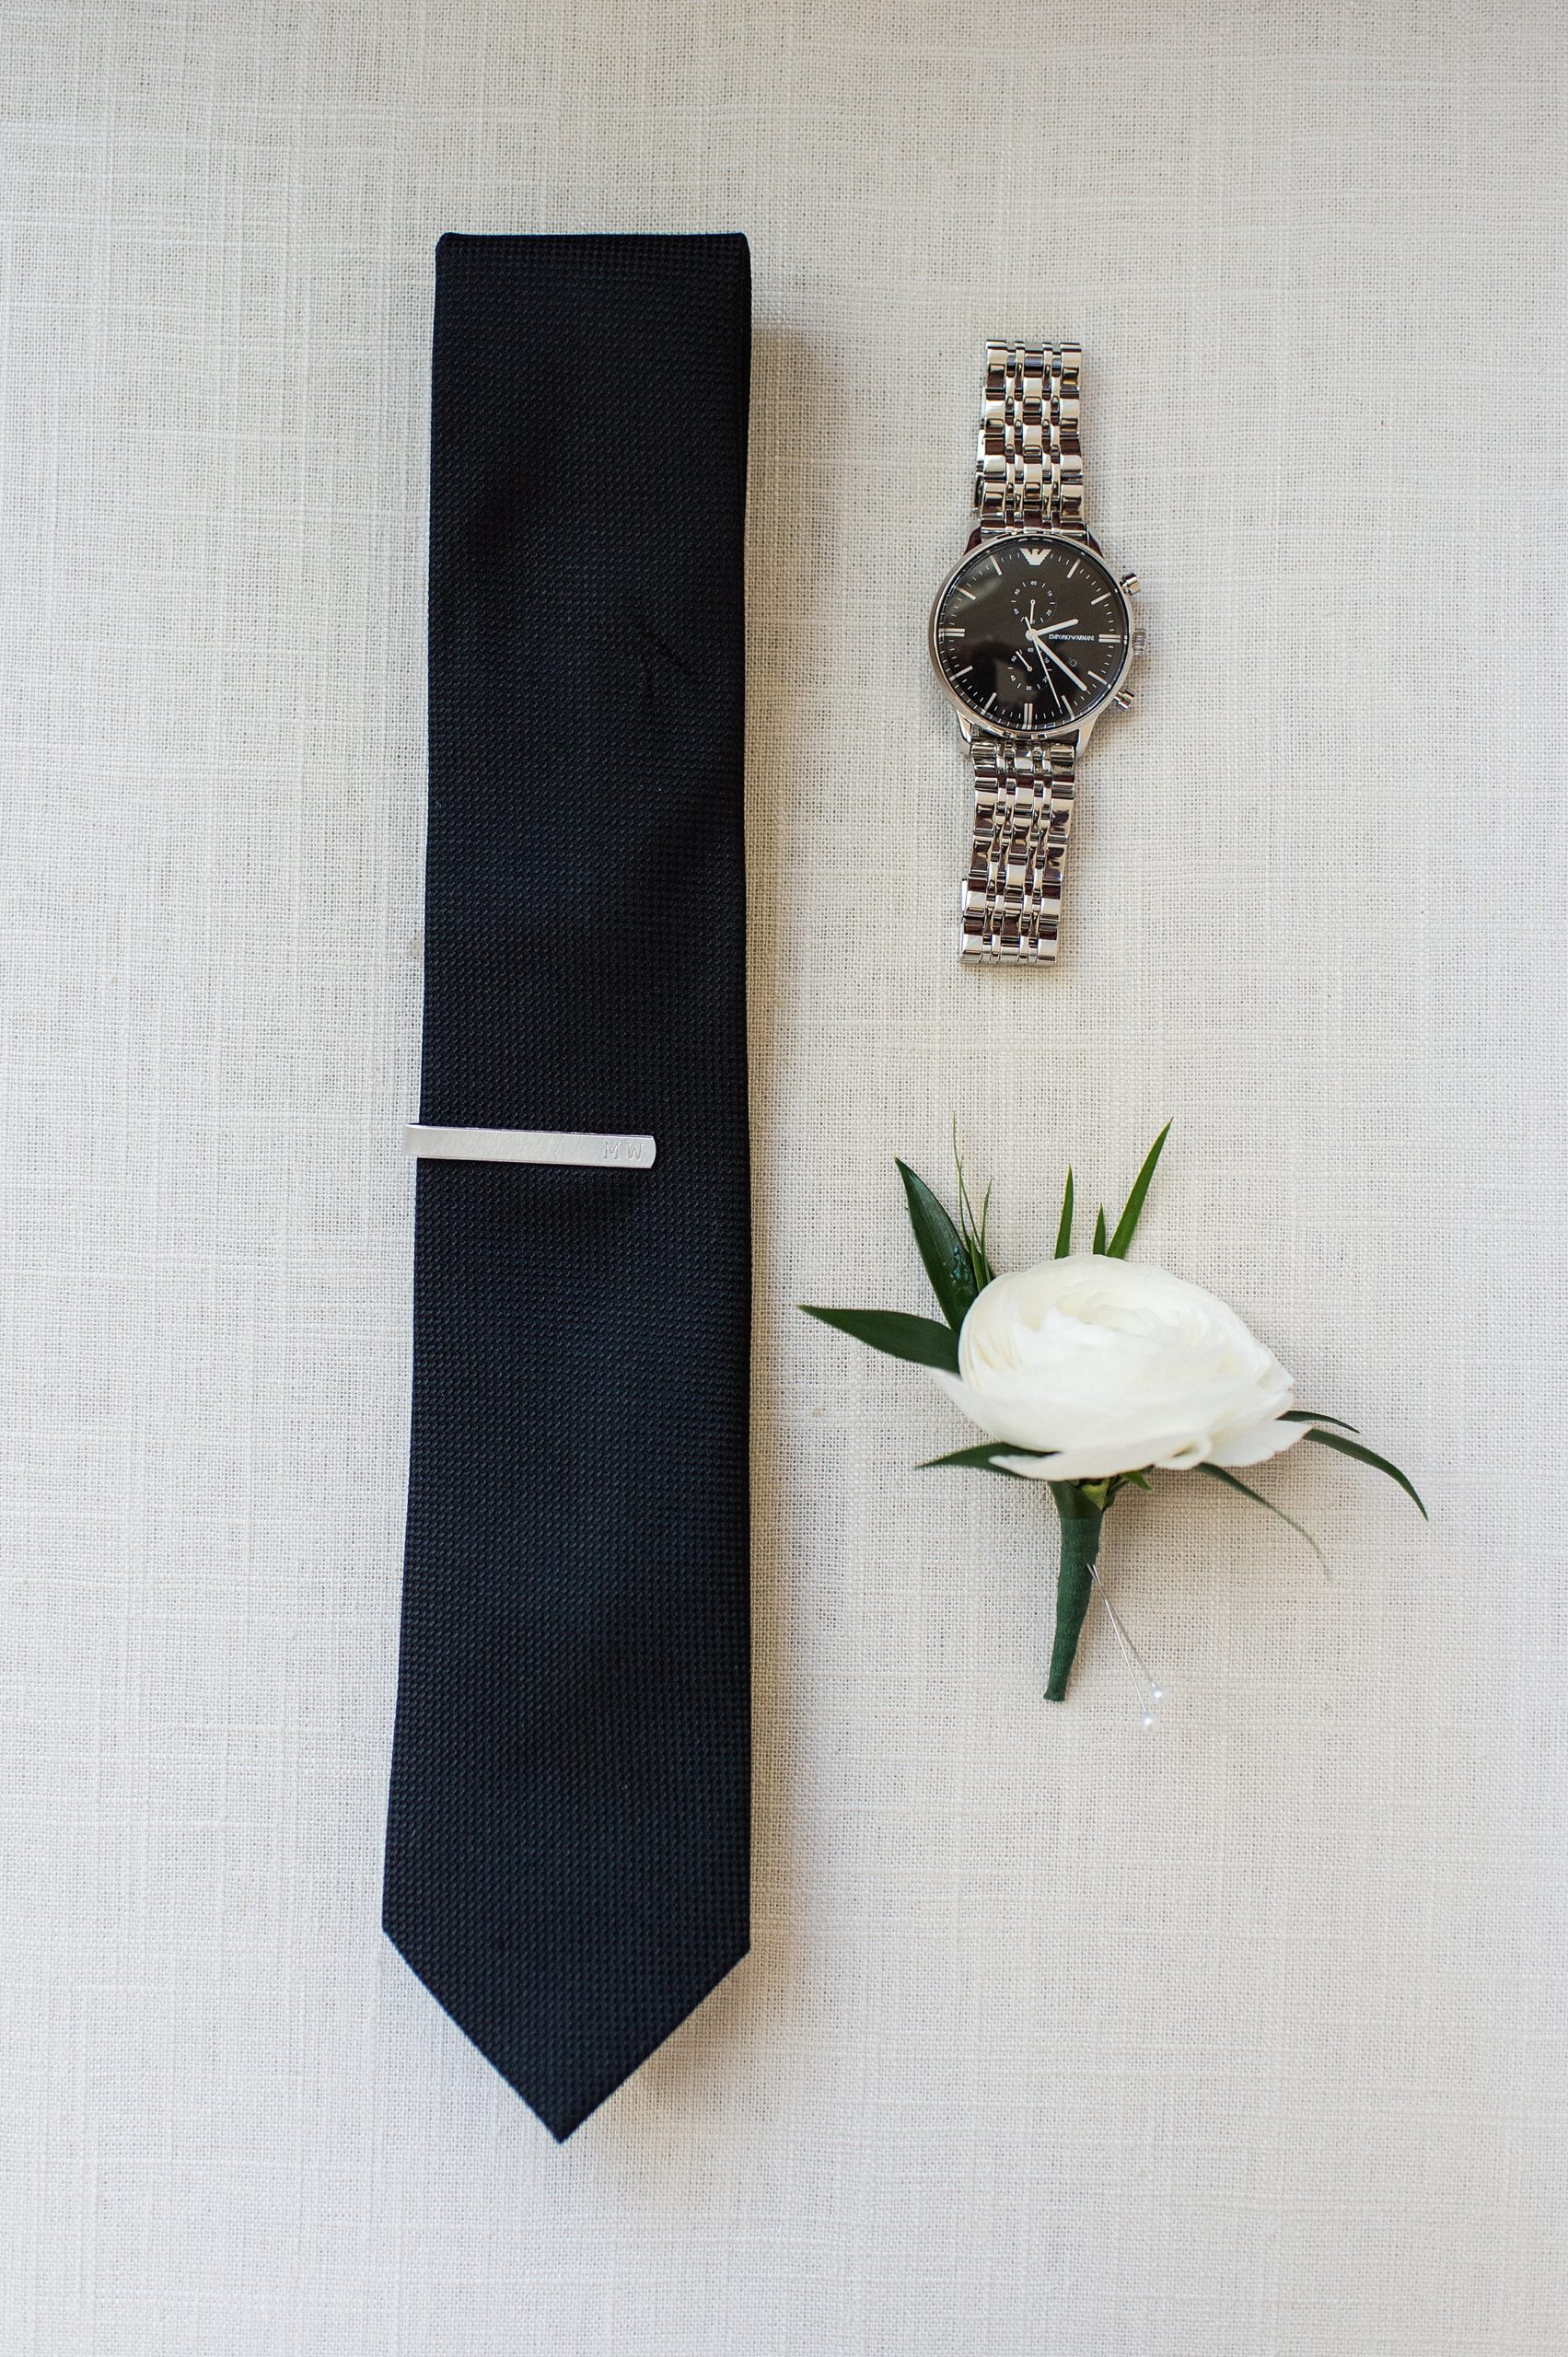 grooms details in styled flat lay with tie watch and boutonniere